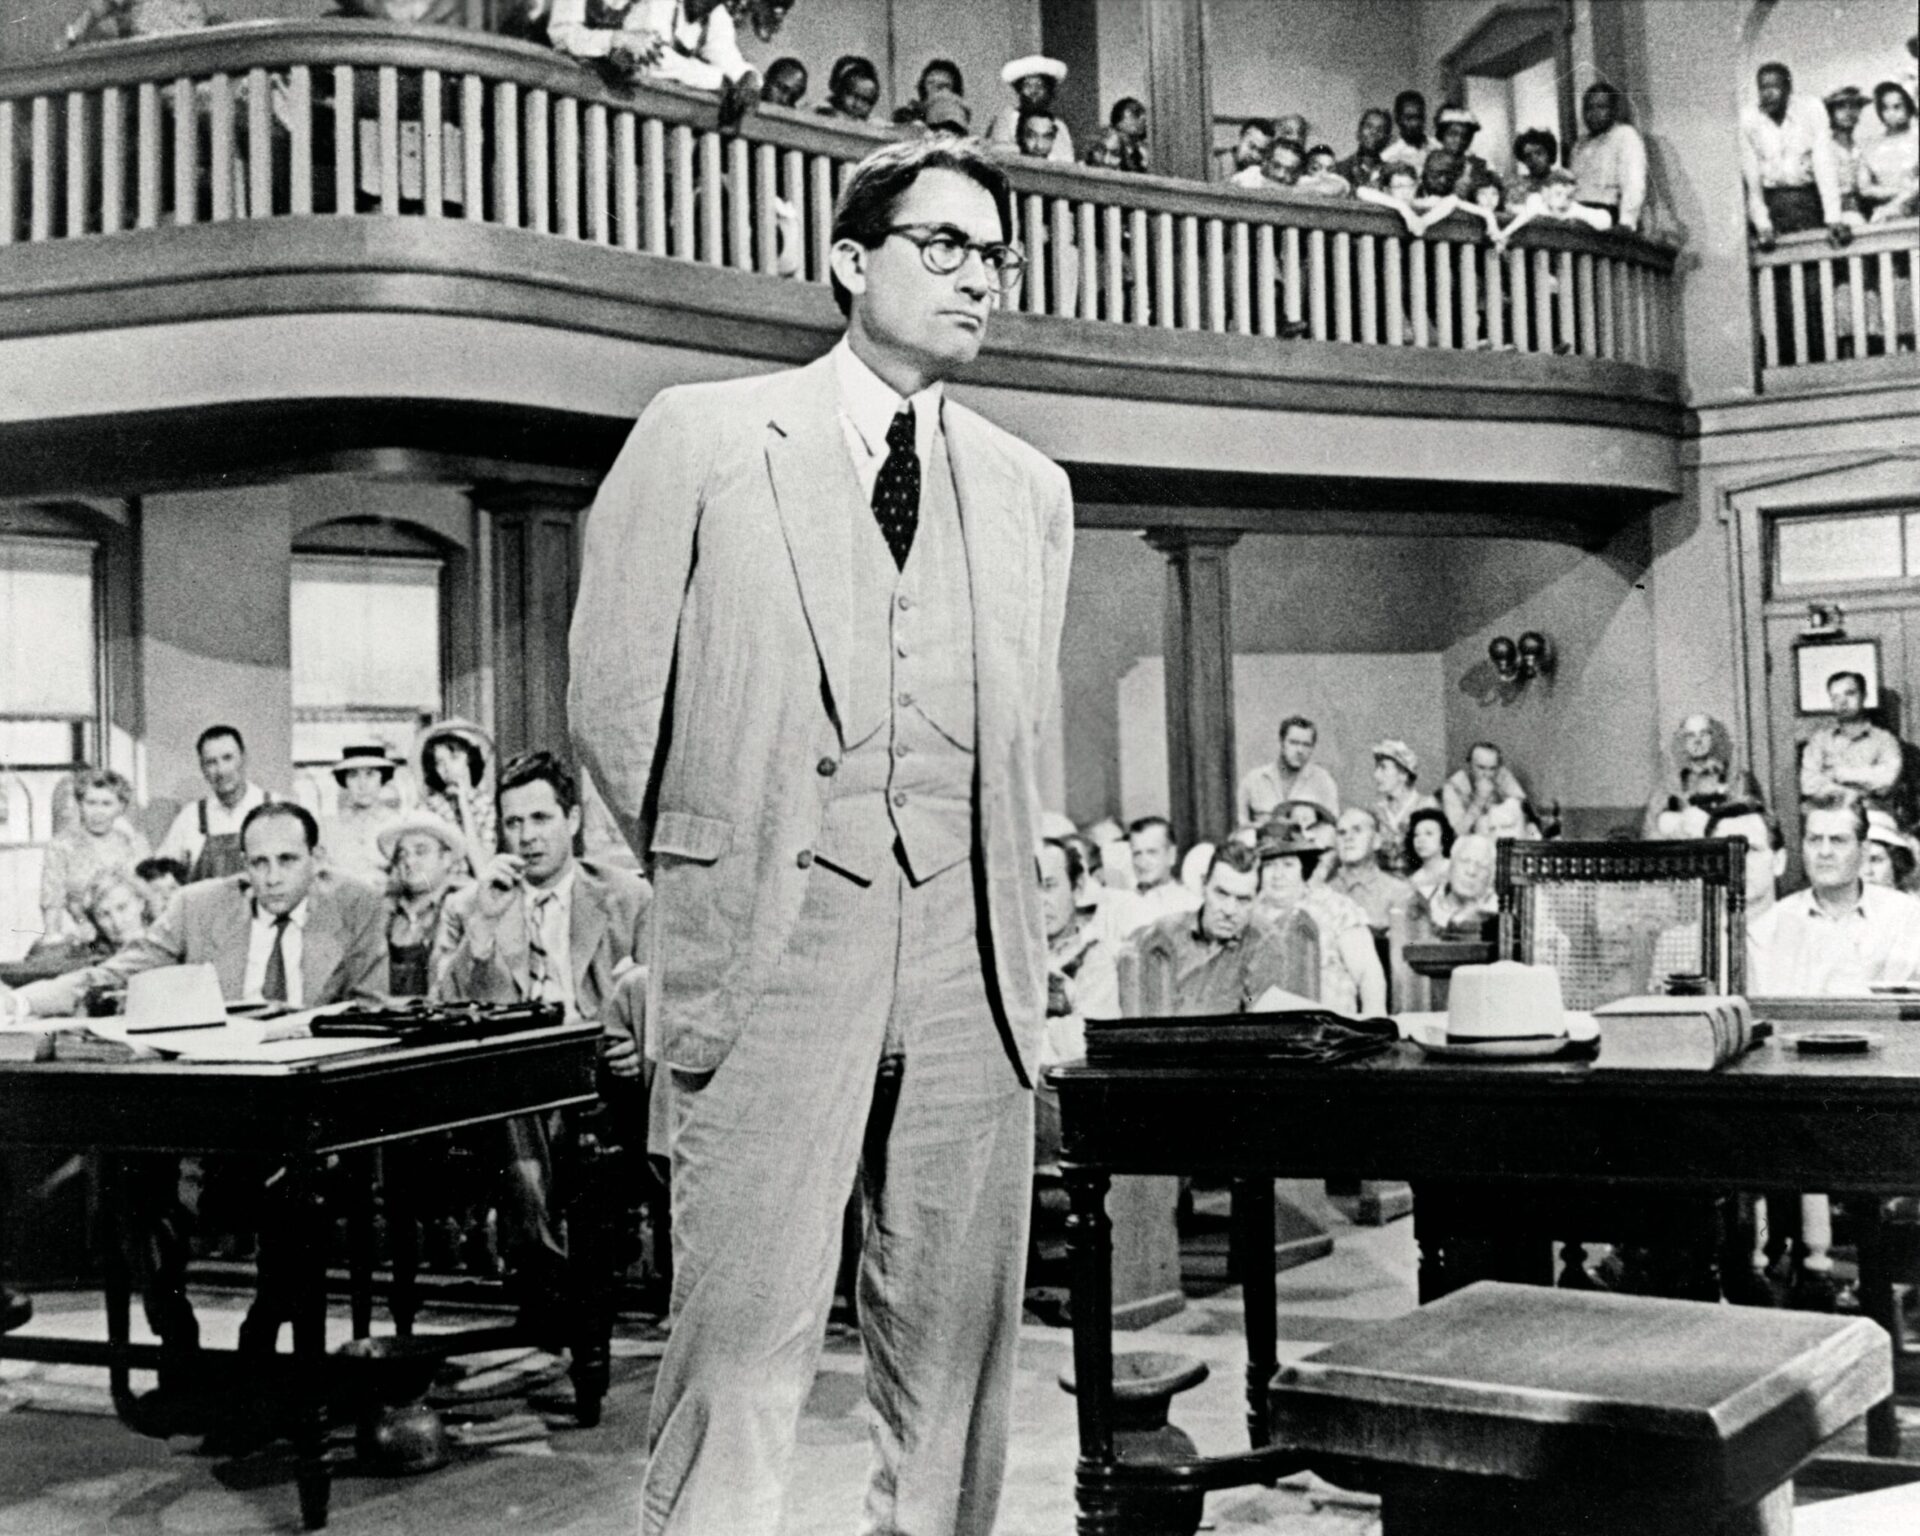 Gregory Peck plays Atticus Finch in a courtroom scene from the movie version of To Kill a Mockingbird.